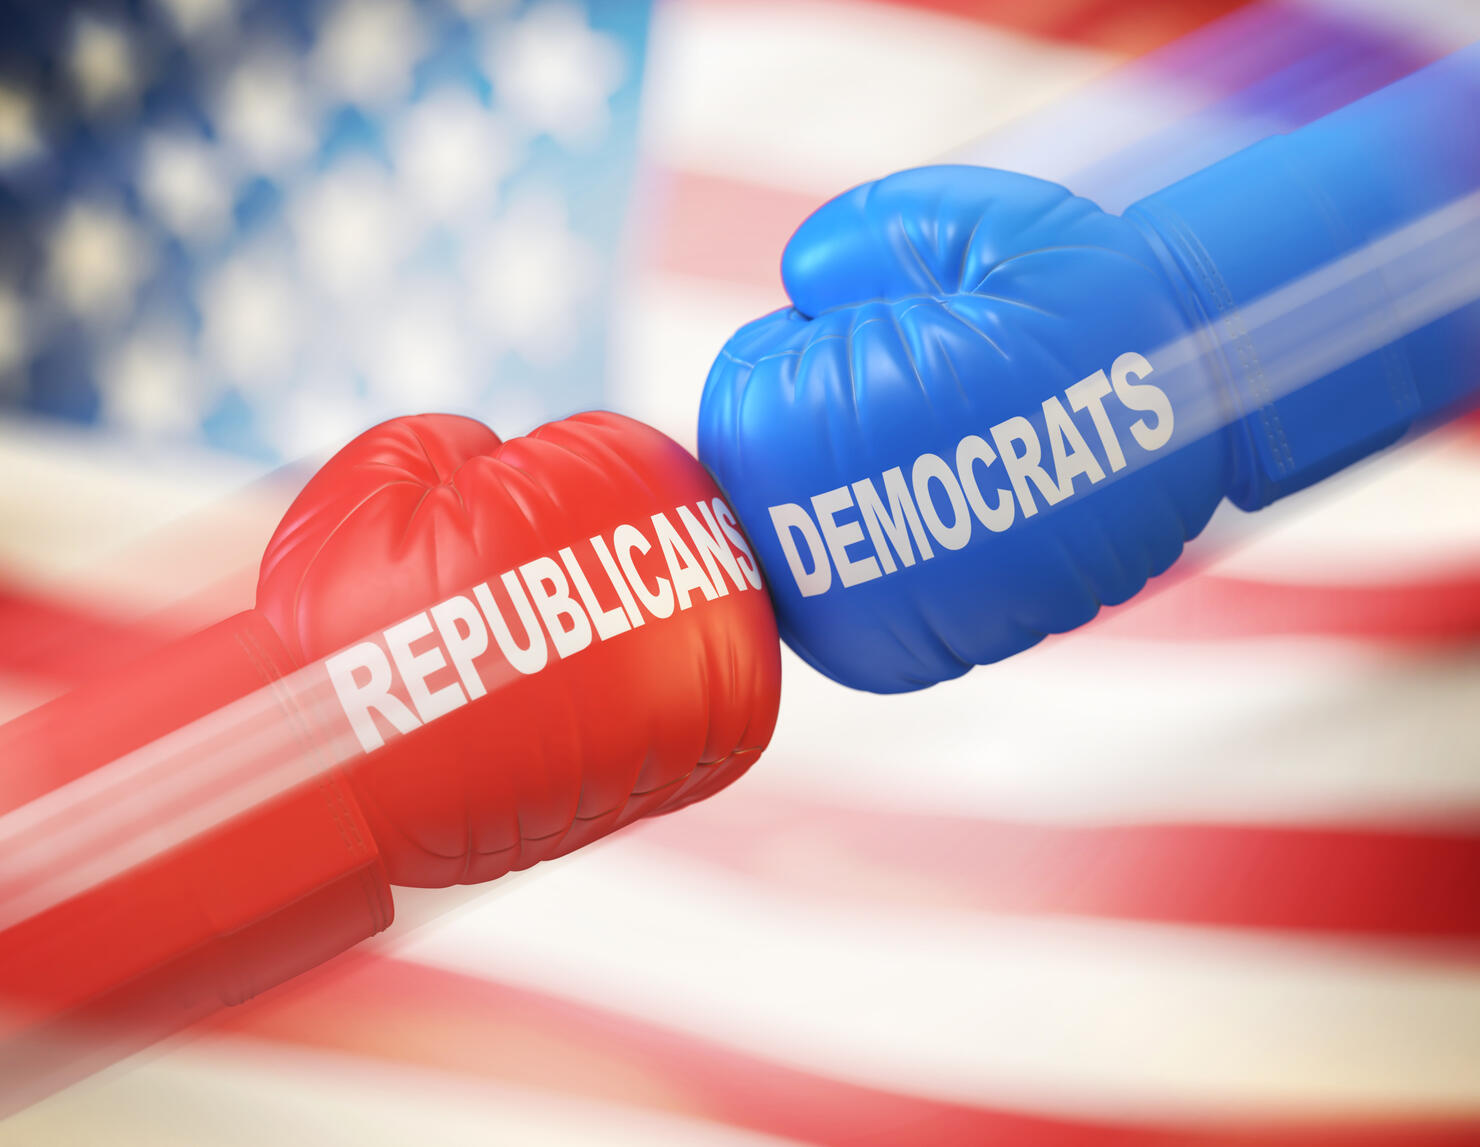 Democrats vs. Republicans. Two boxing gloves against each other in colors of Democratic and Republican party